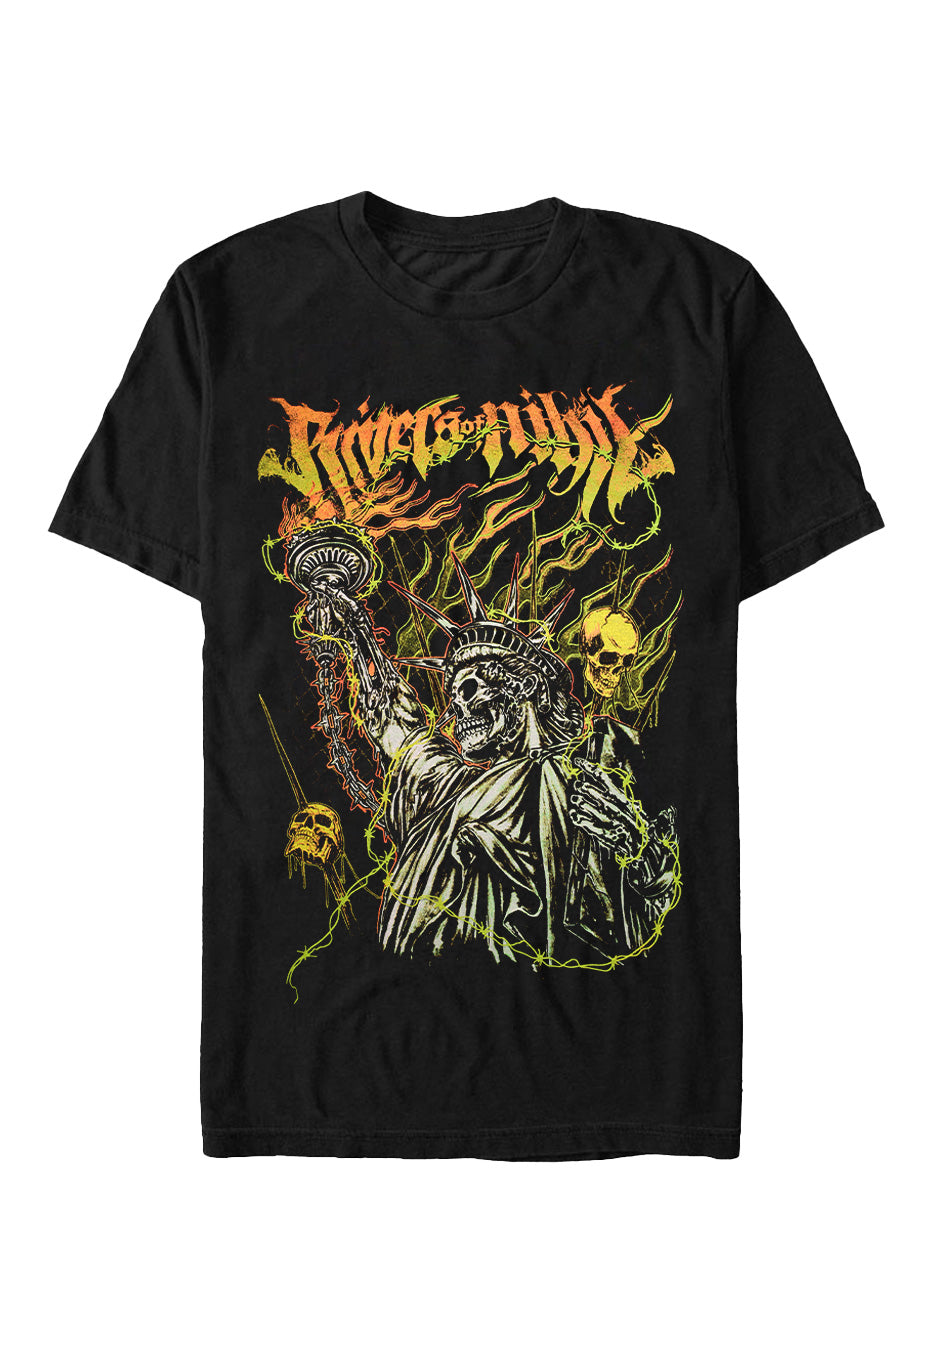 Rivers Of Nihil - American Death - T-Shirt